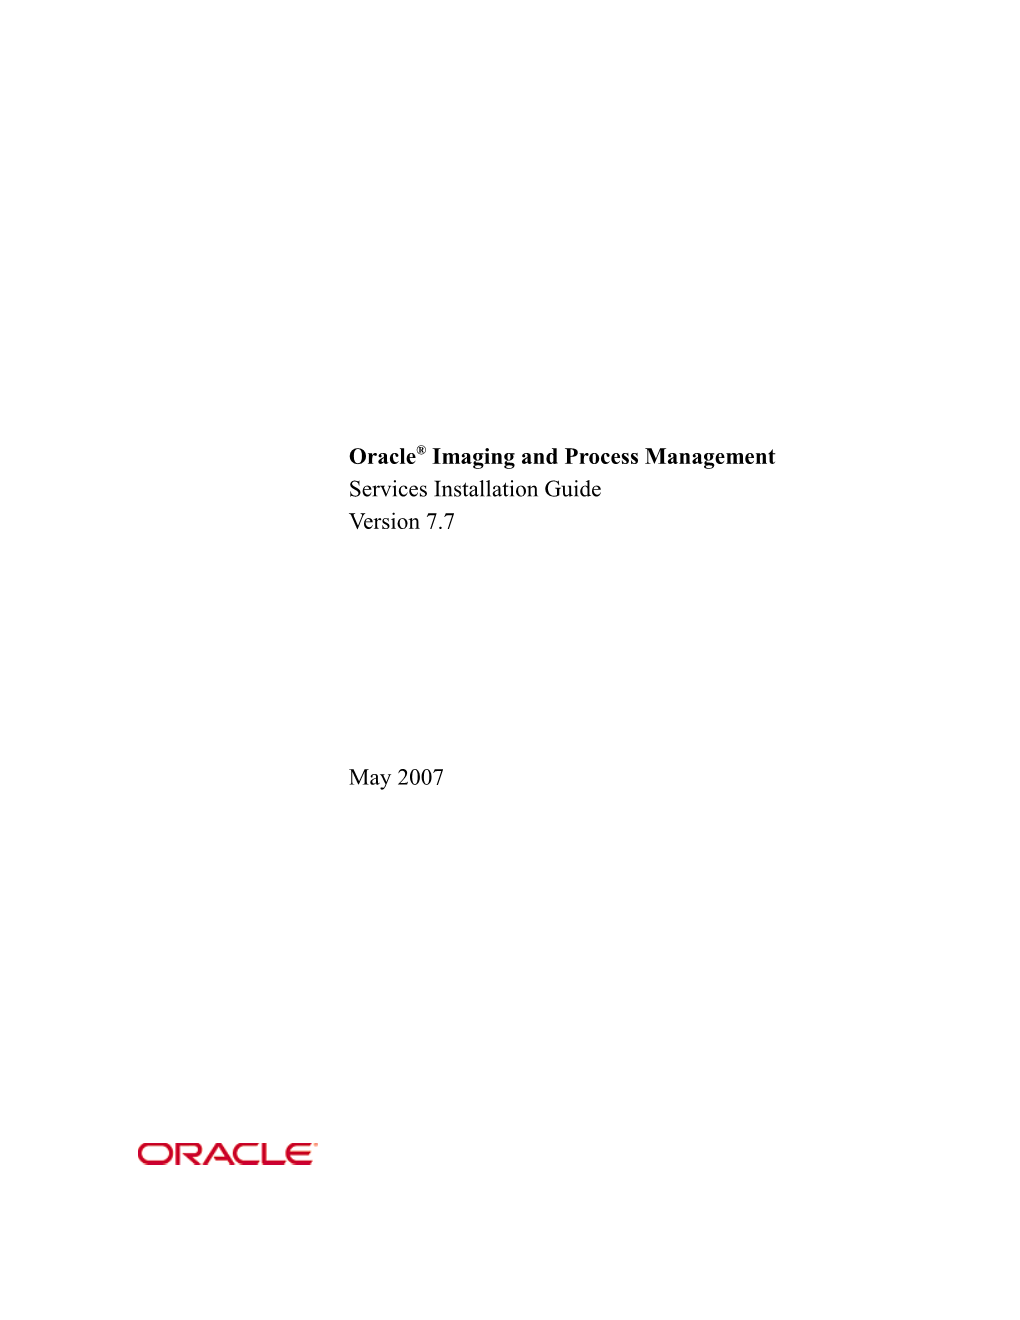 Oracle Imaging and Process Management Services Installation Guide s1